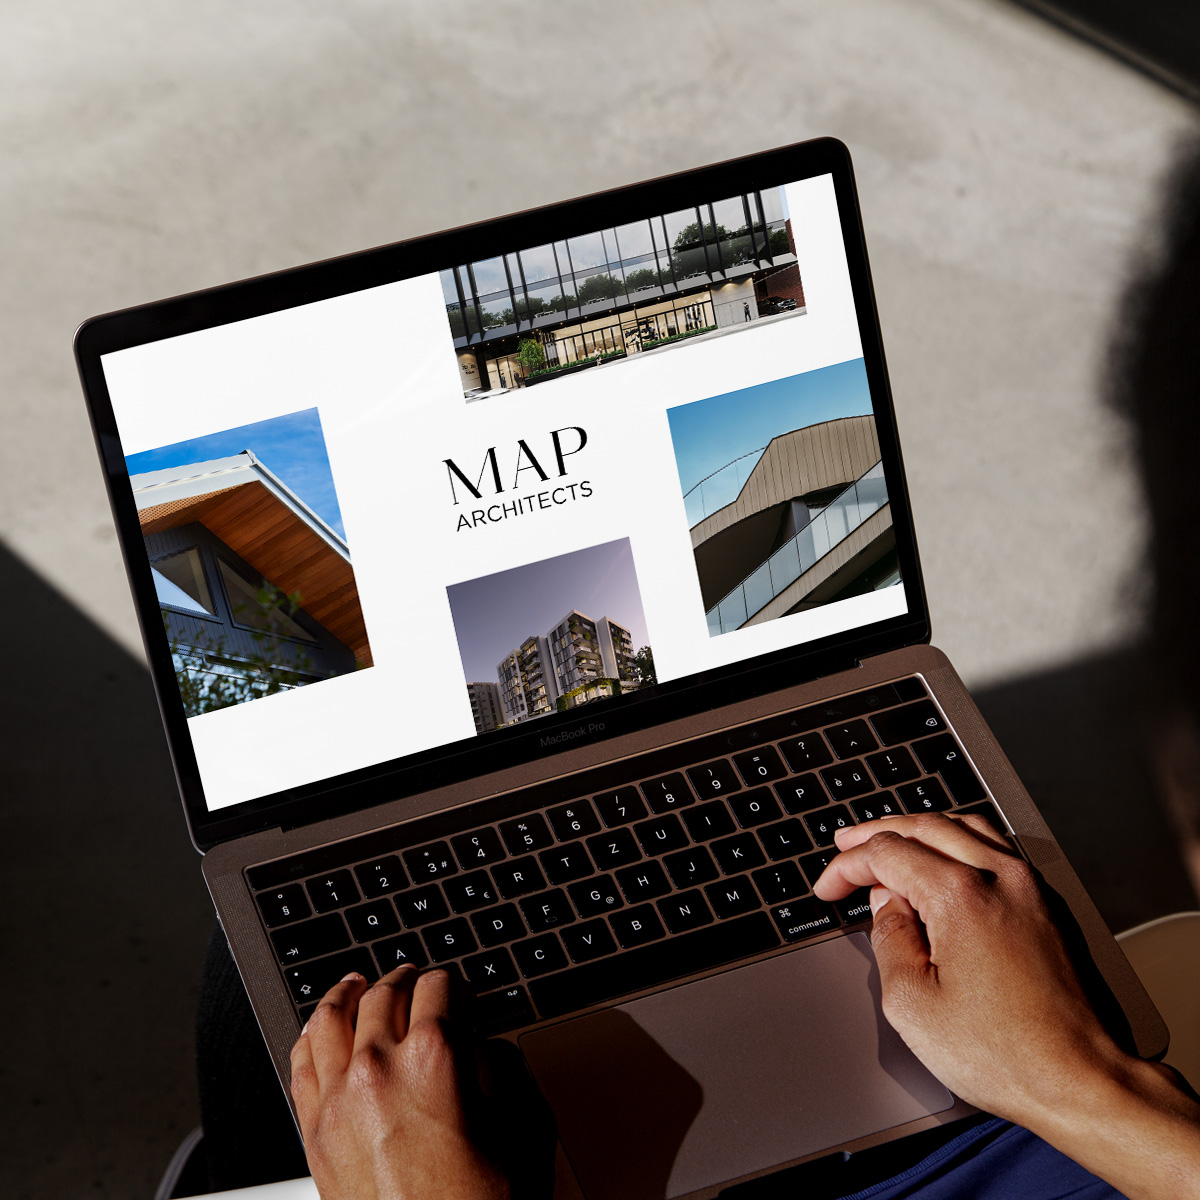 MAP Architects website